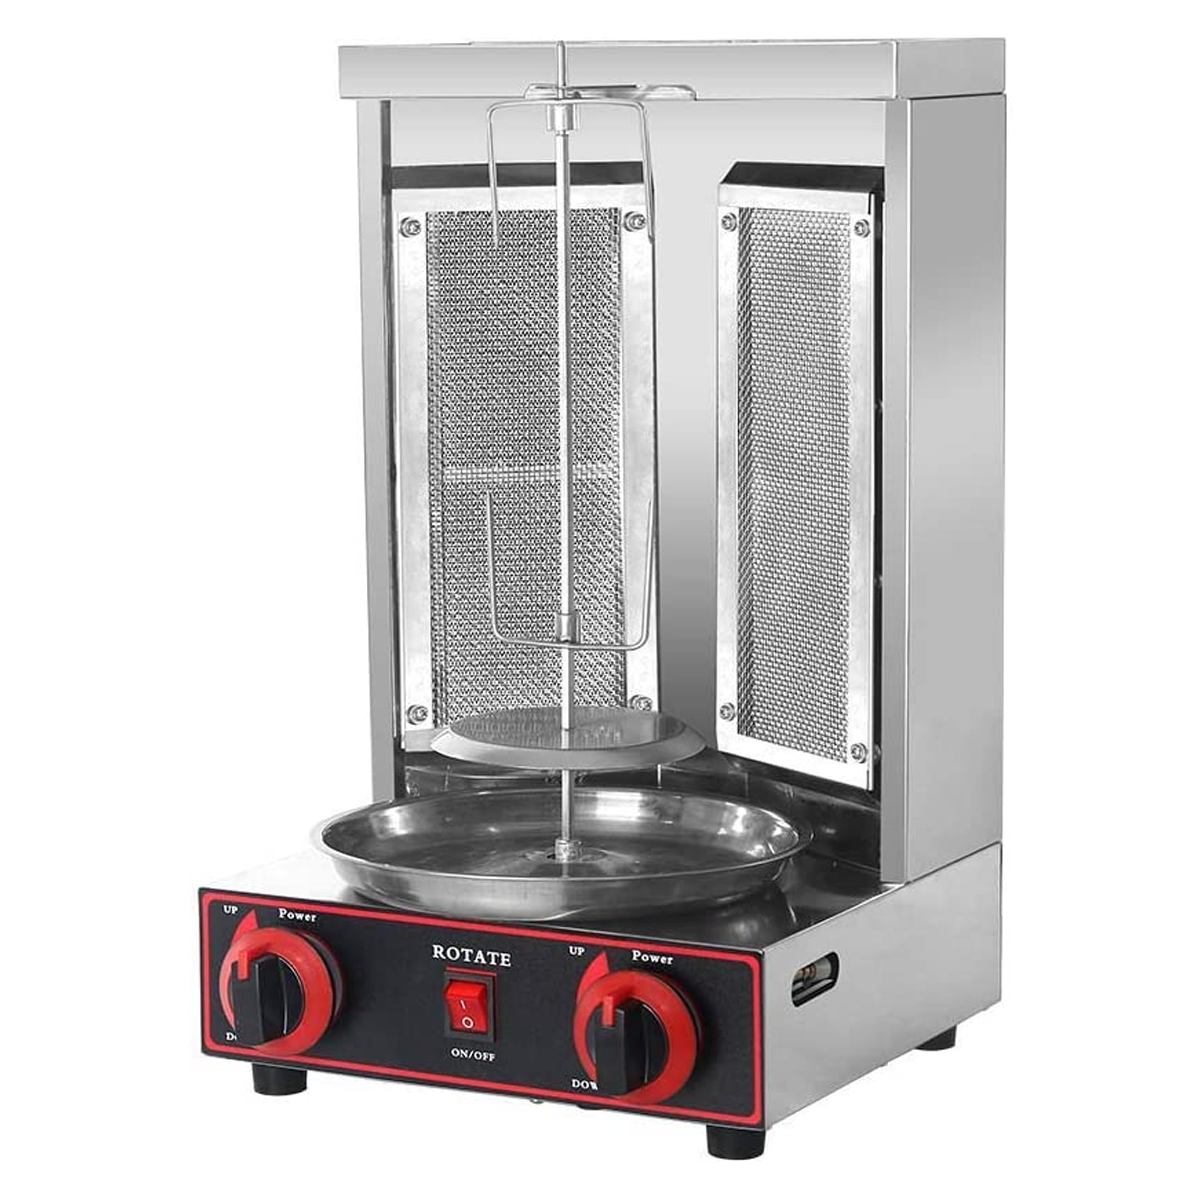 Shawarma Gyro BBQ Meat Machine Vertical Kebab Doner Meat Infrared Grill Stainless Steel 2Burners Rotisserie Broiler Cooking